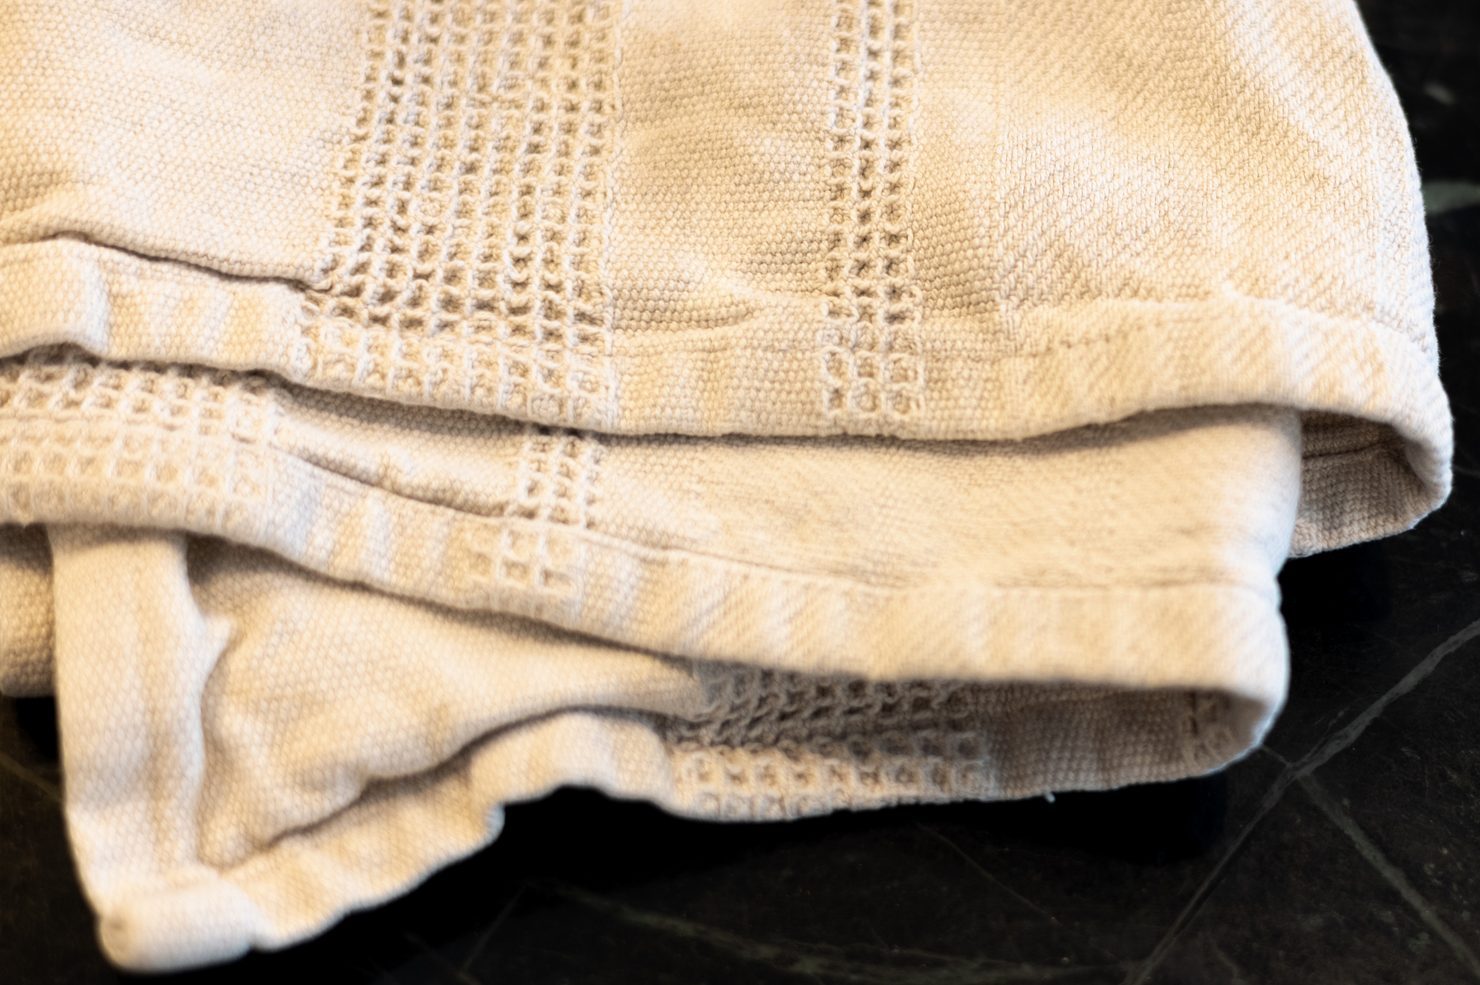 folded white dish towel on kitchen countertop